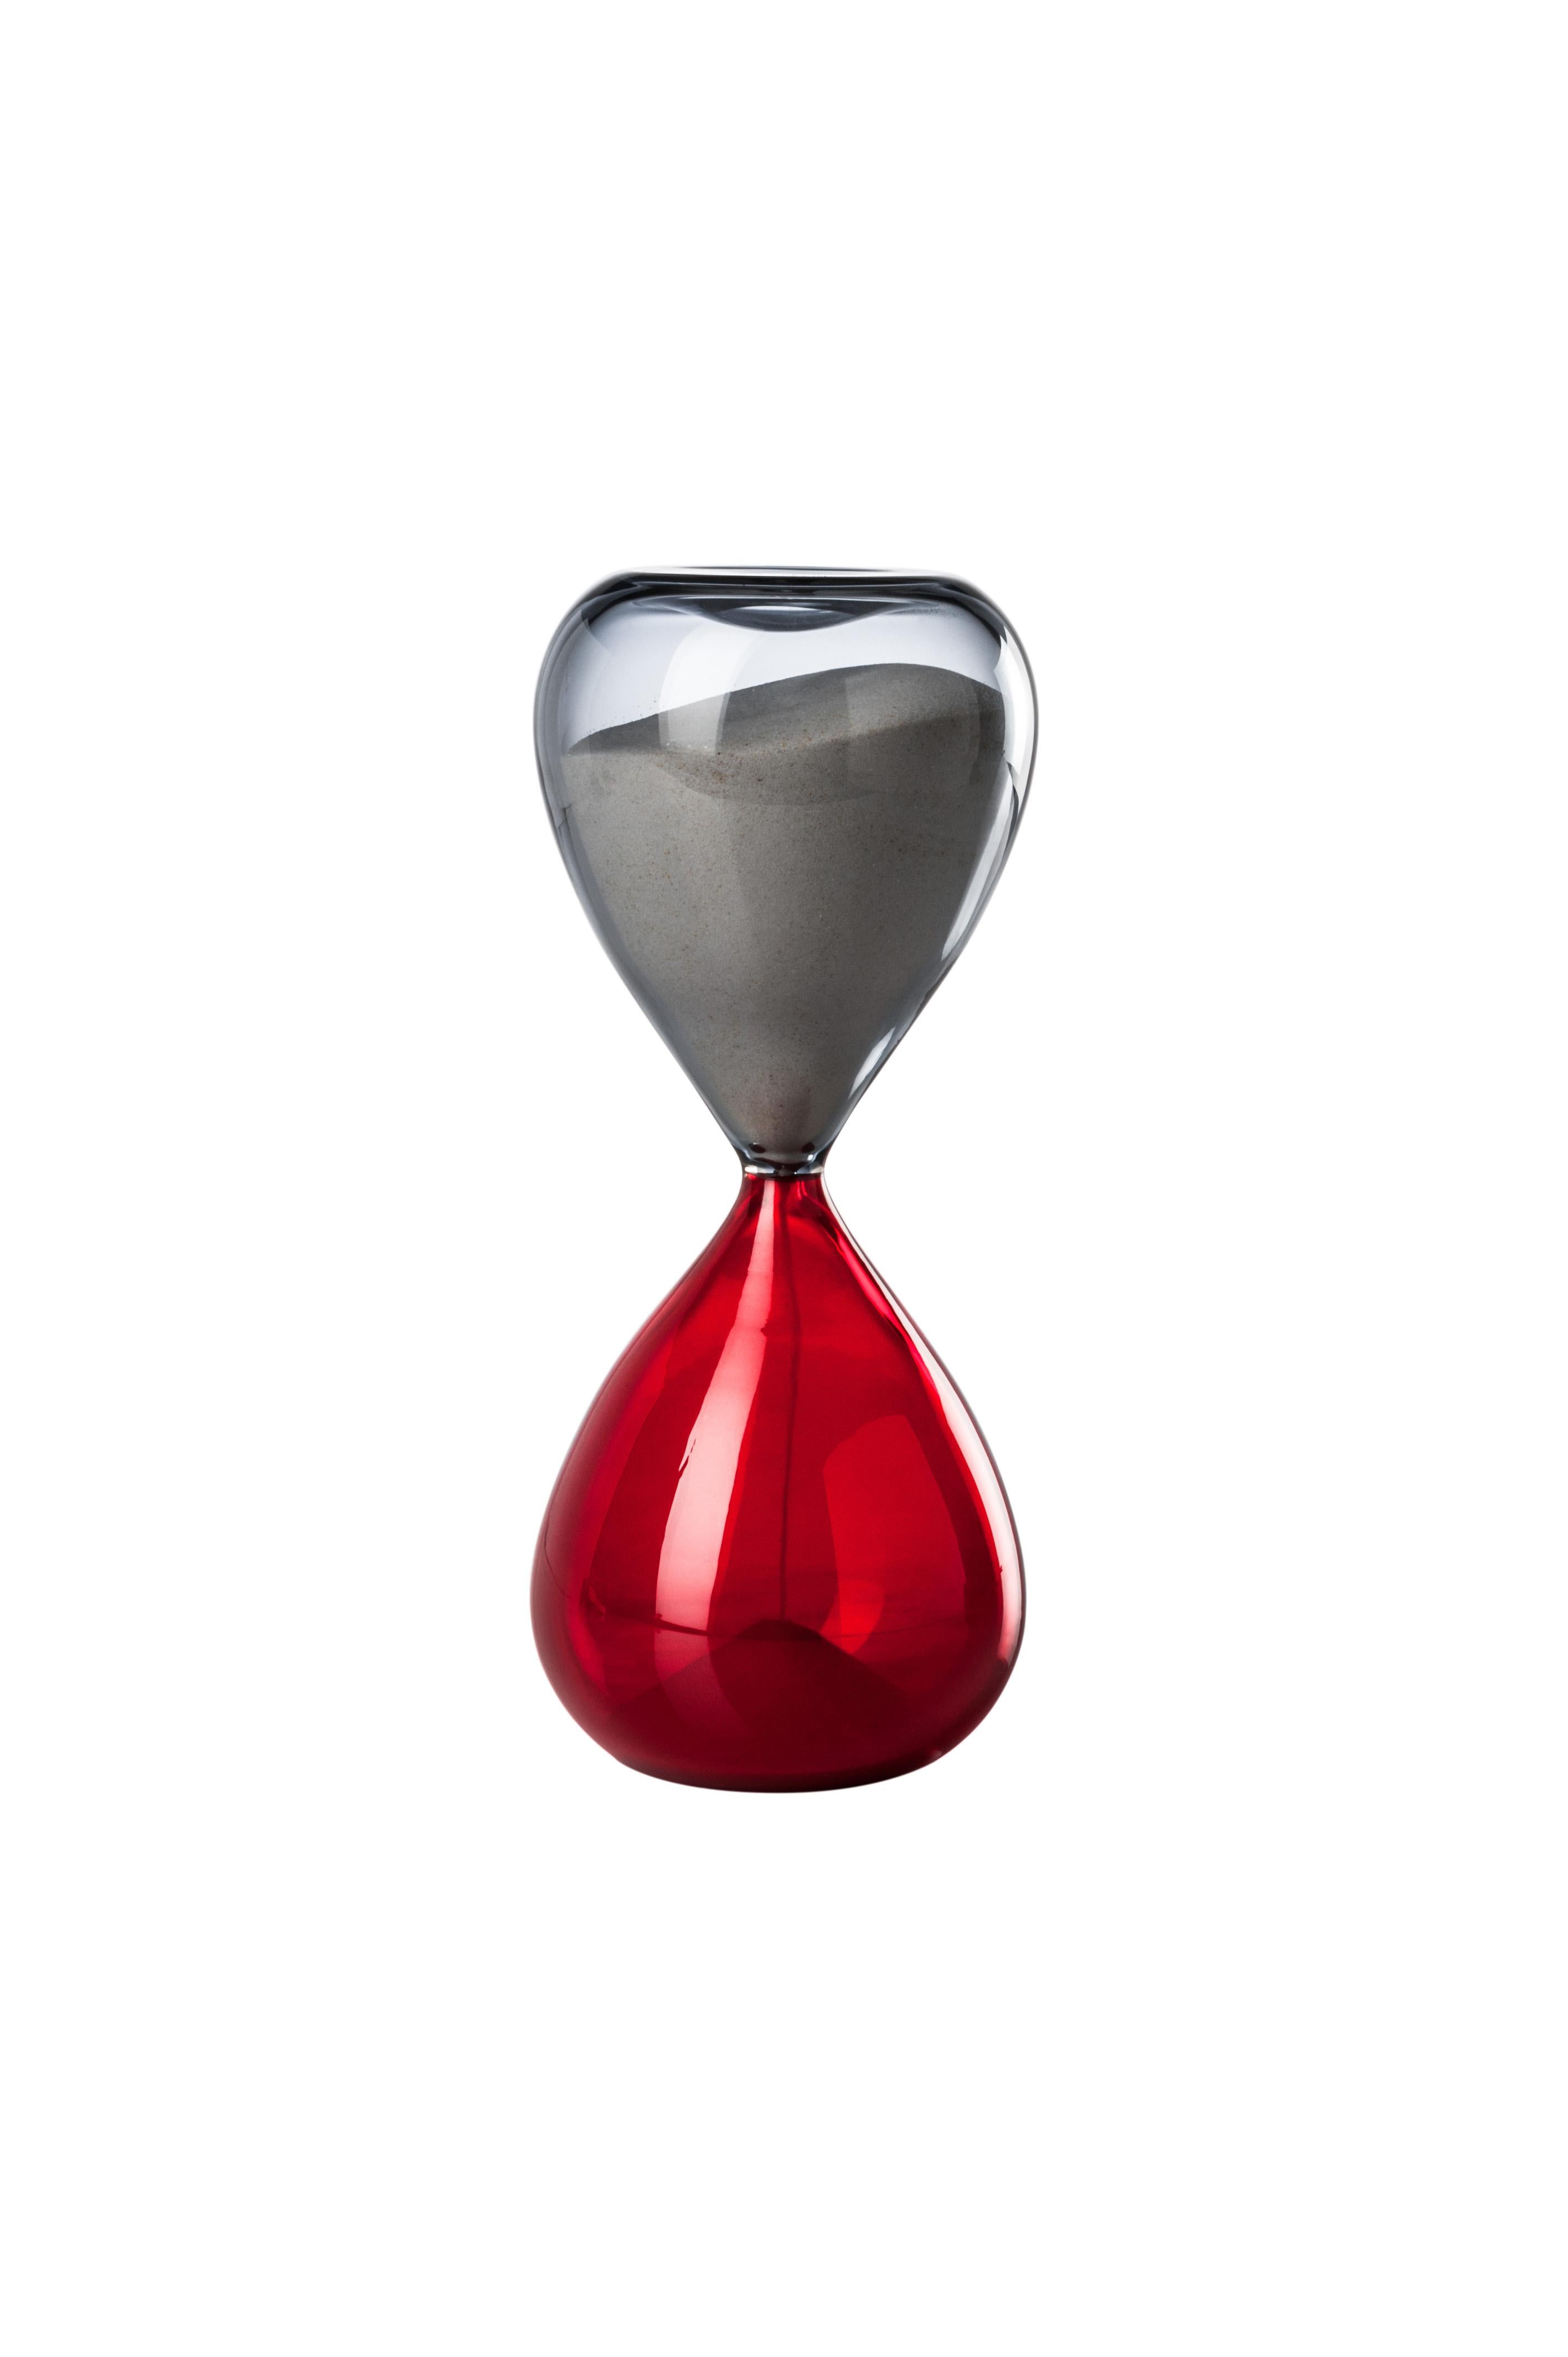 Venini glass hourglass in grey and red. Perfect for indoor home decor or as a statement piece for any room. Limited edition of 199 pieces. Also available in other colors on 1stdibs.

Dimensions: 13.5 cm diameter x 24 cm height.